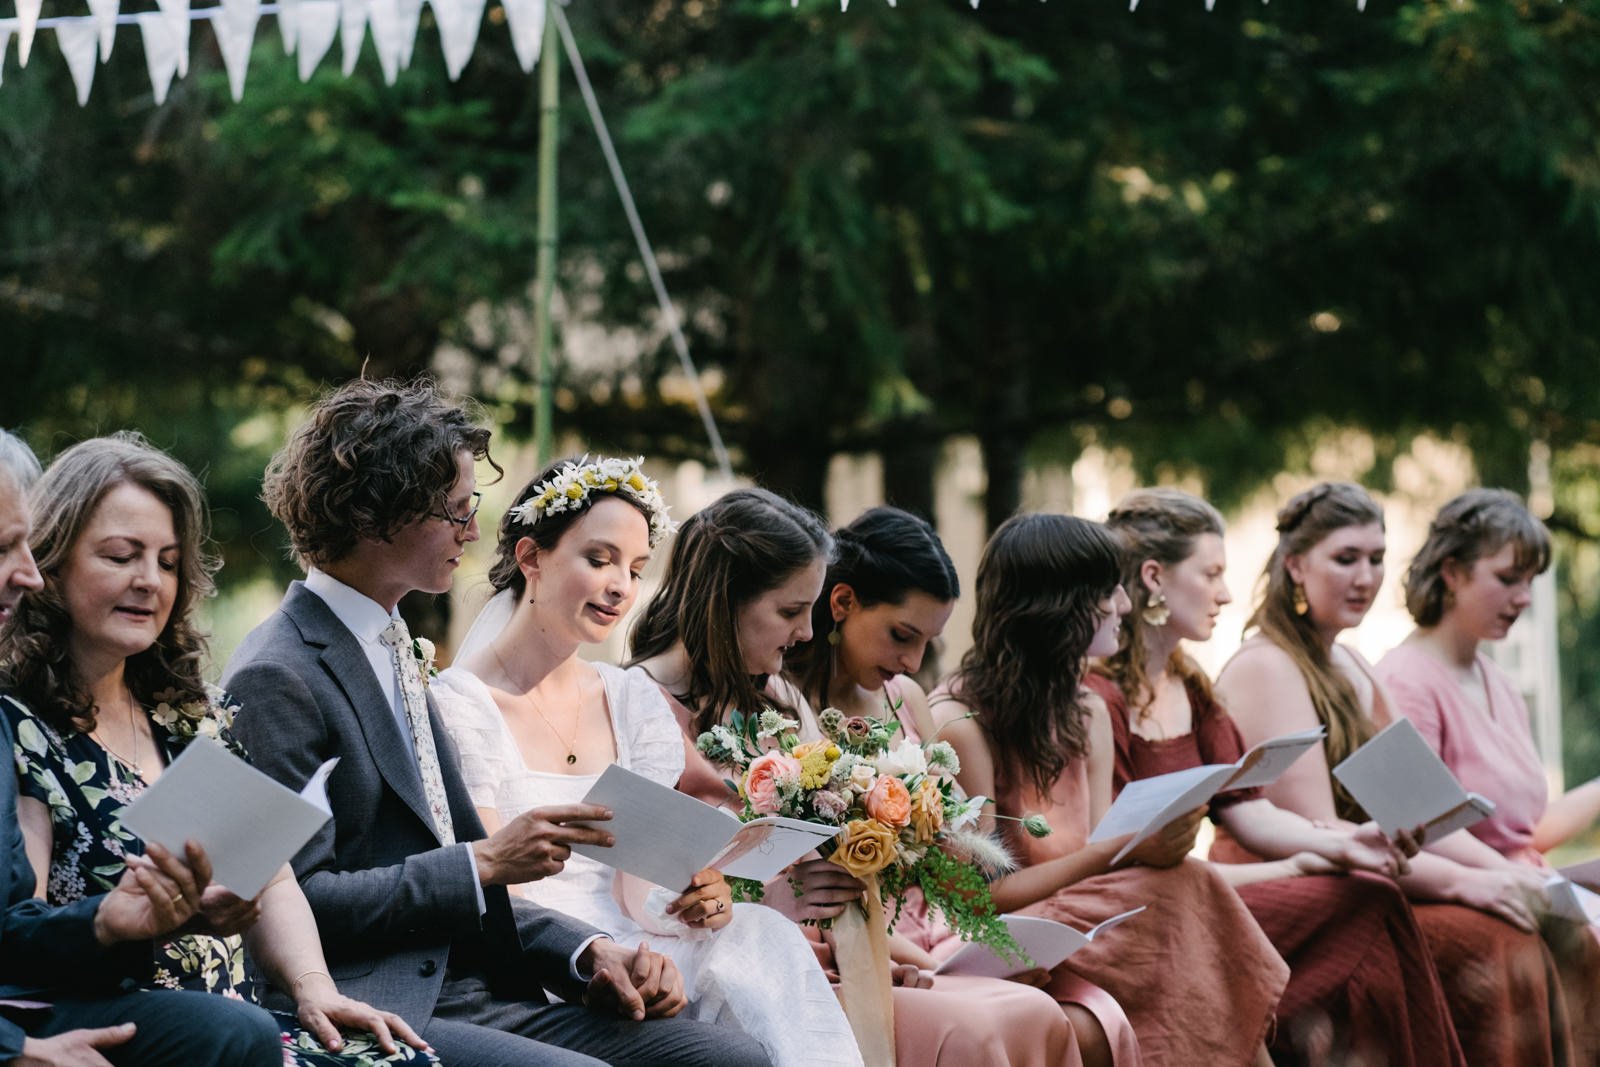  Bride and groom sing together while sun shines alone on their face while guests read hymn words 